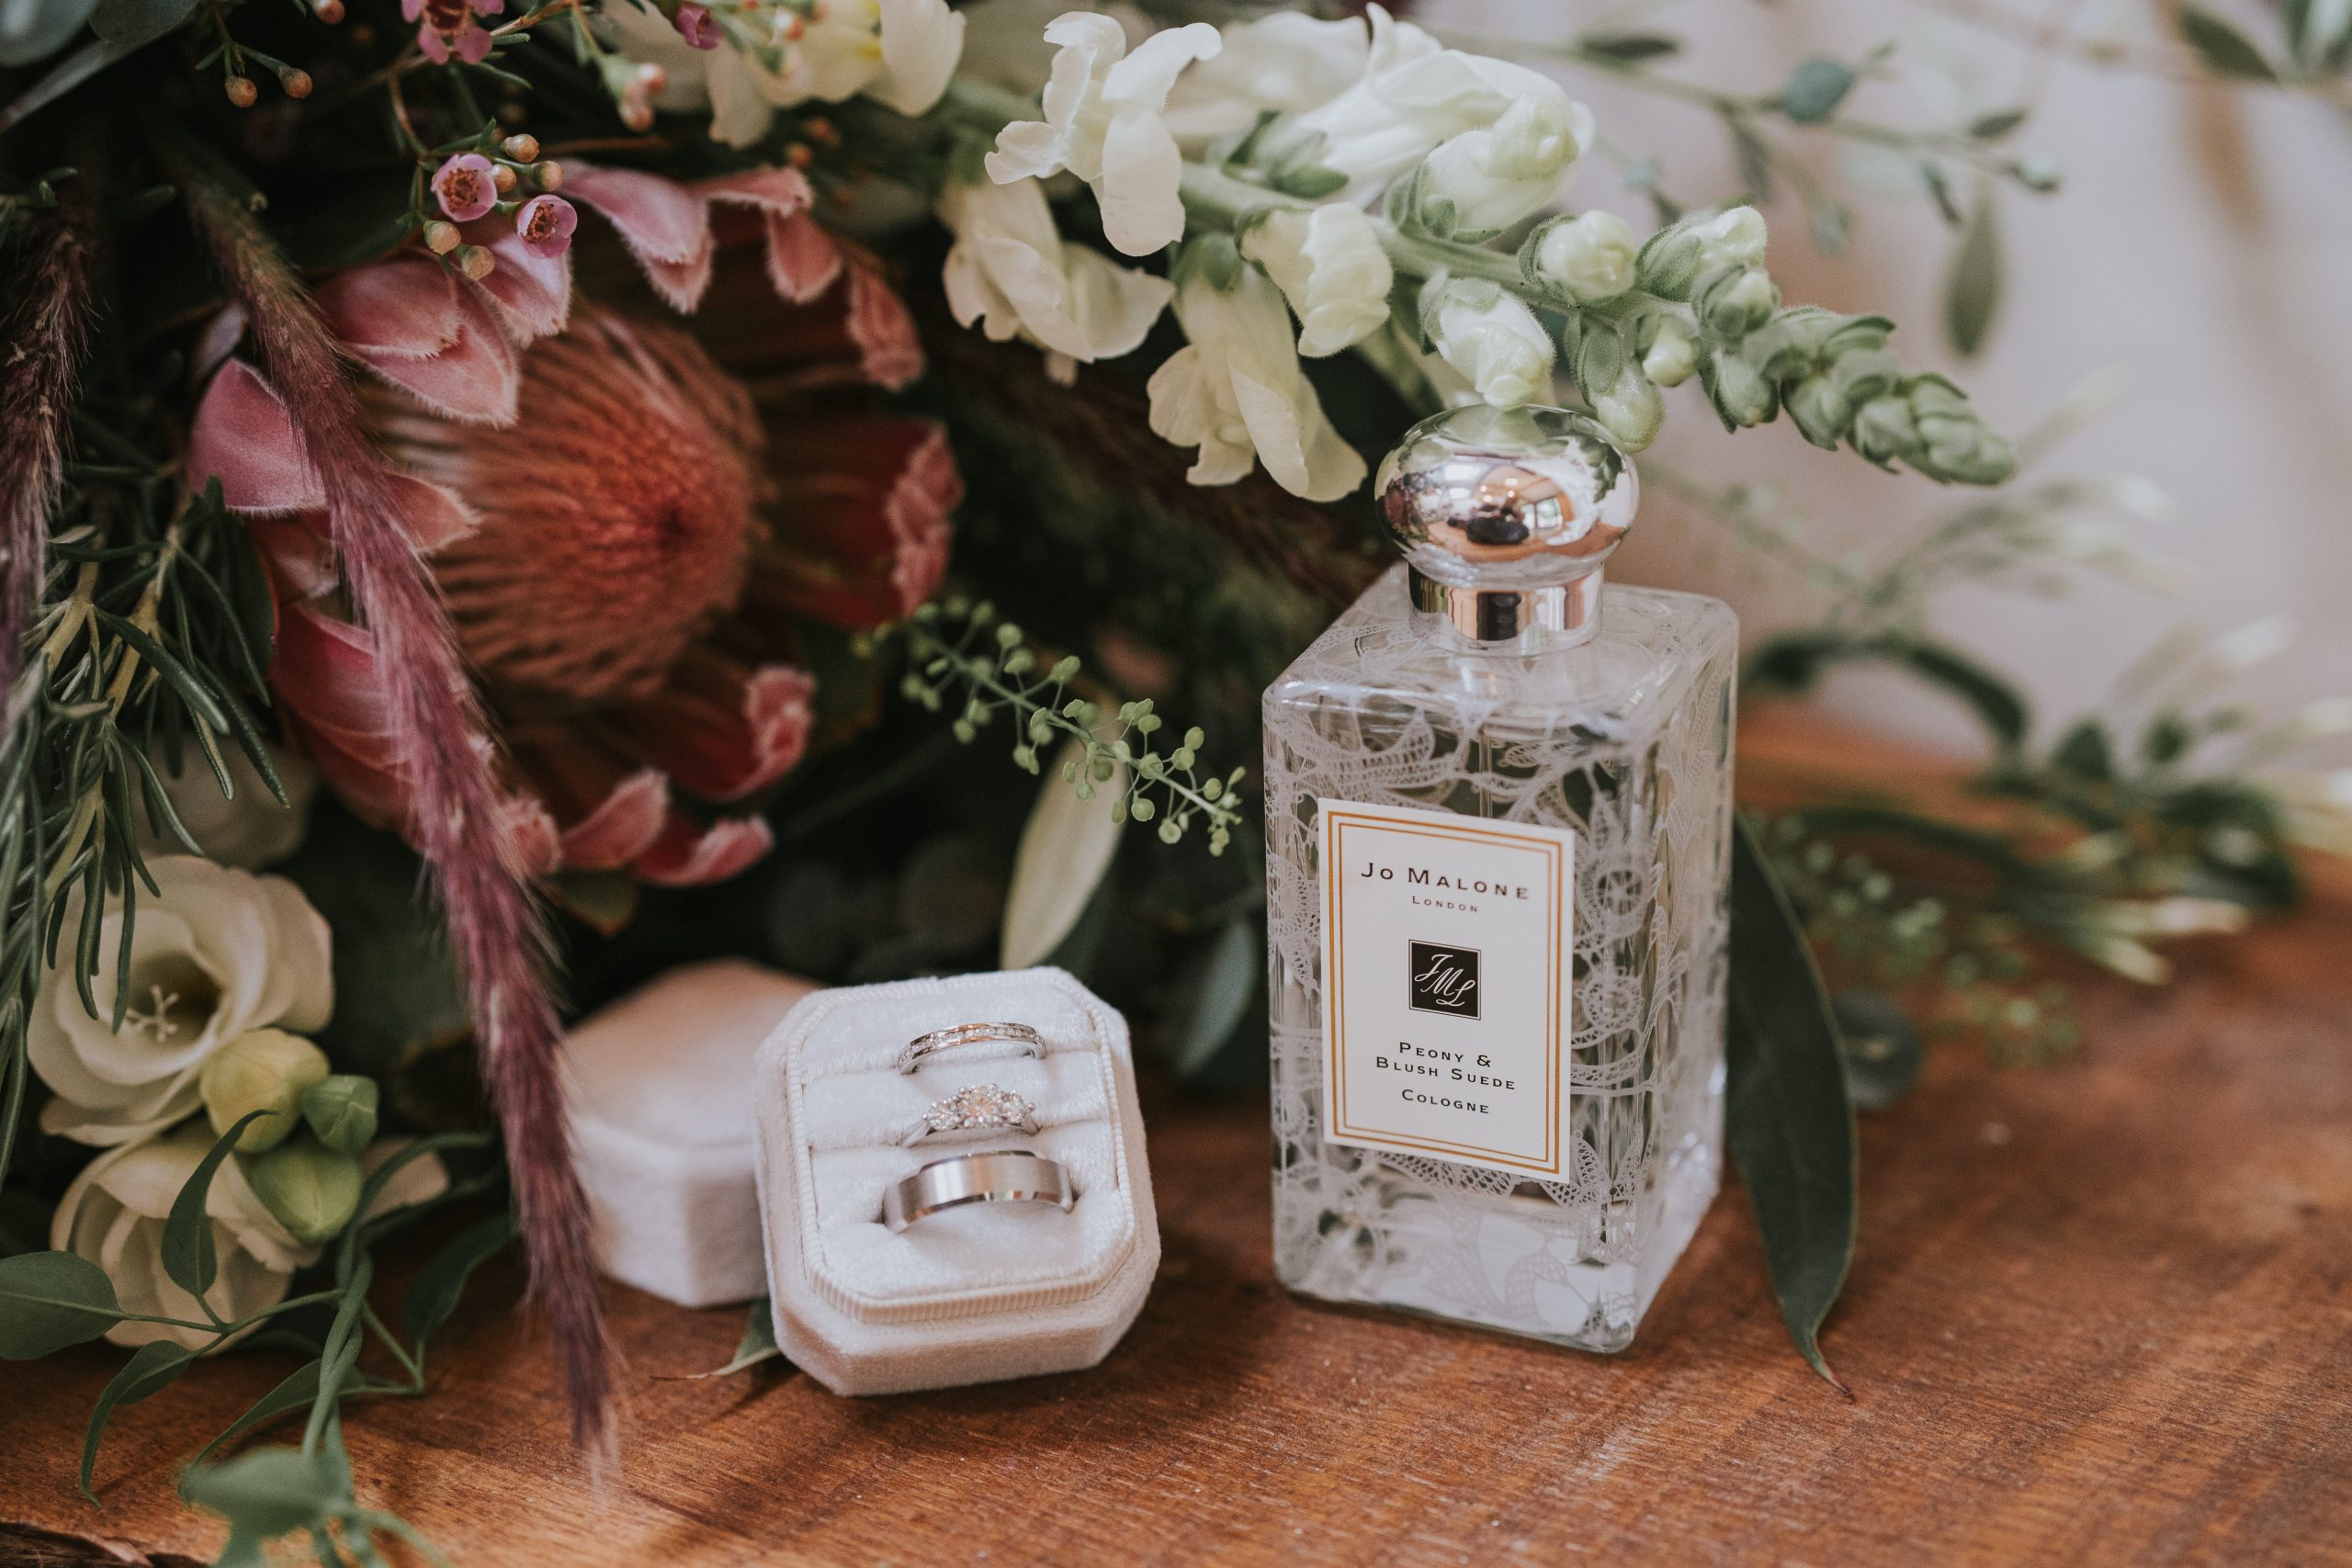 All the smells of Tythe in a Jo Malone bottle